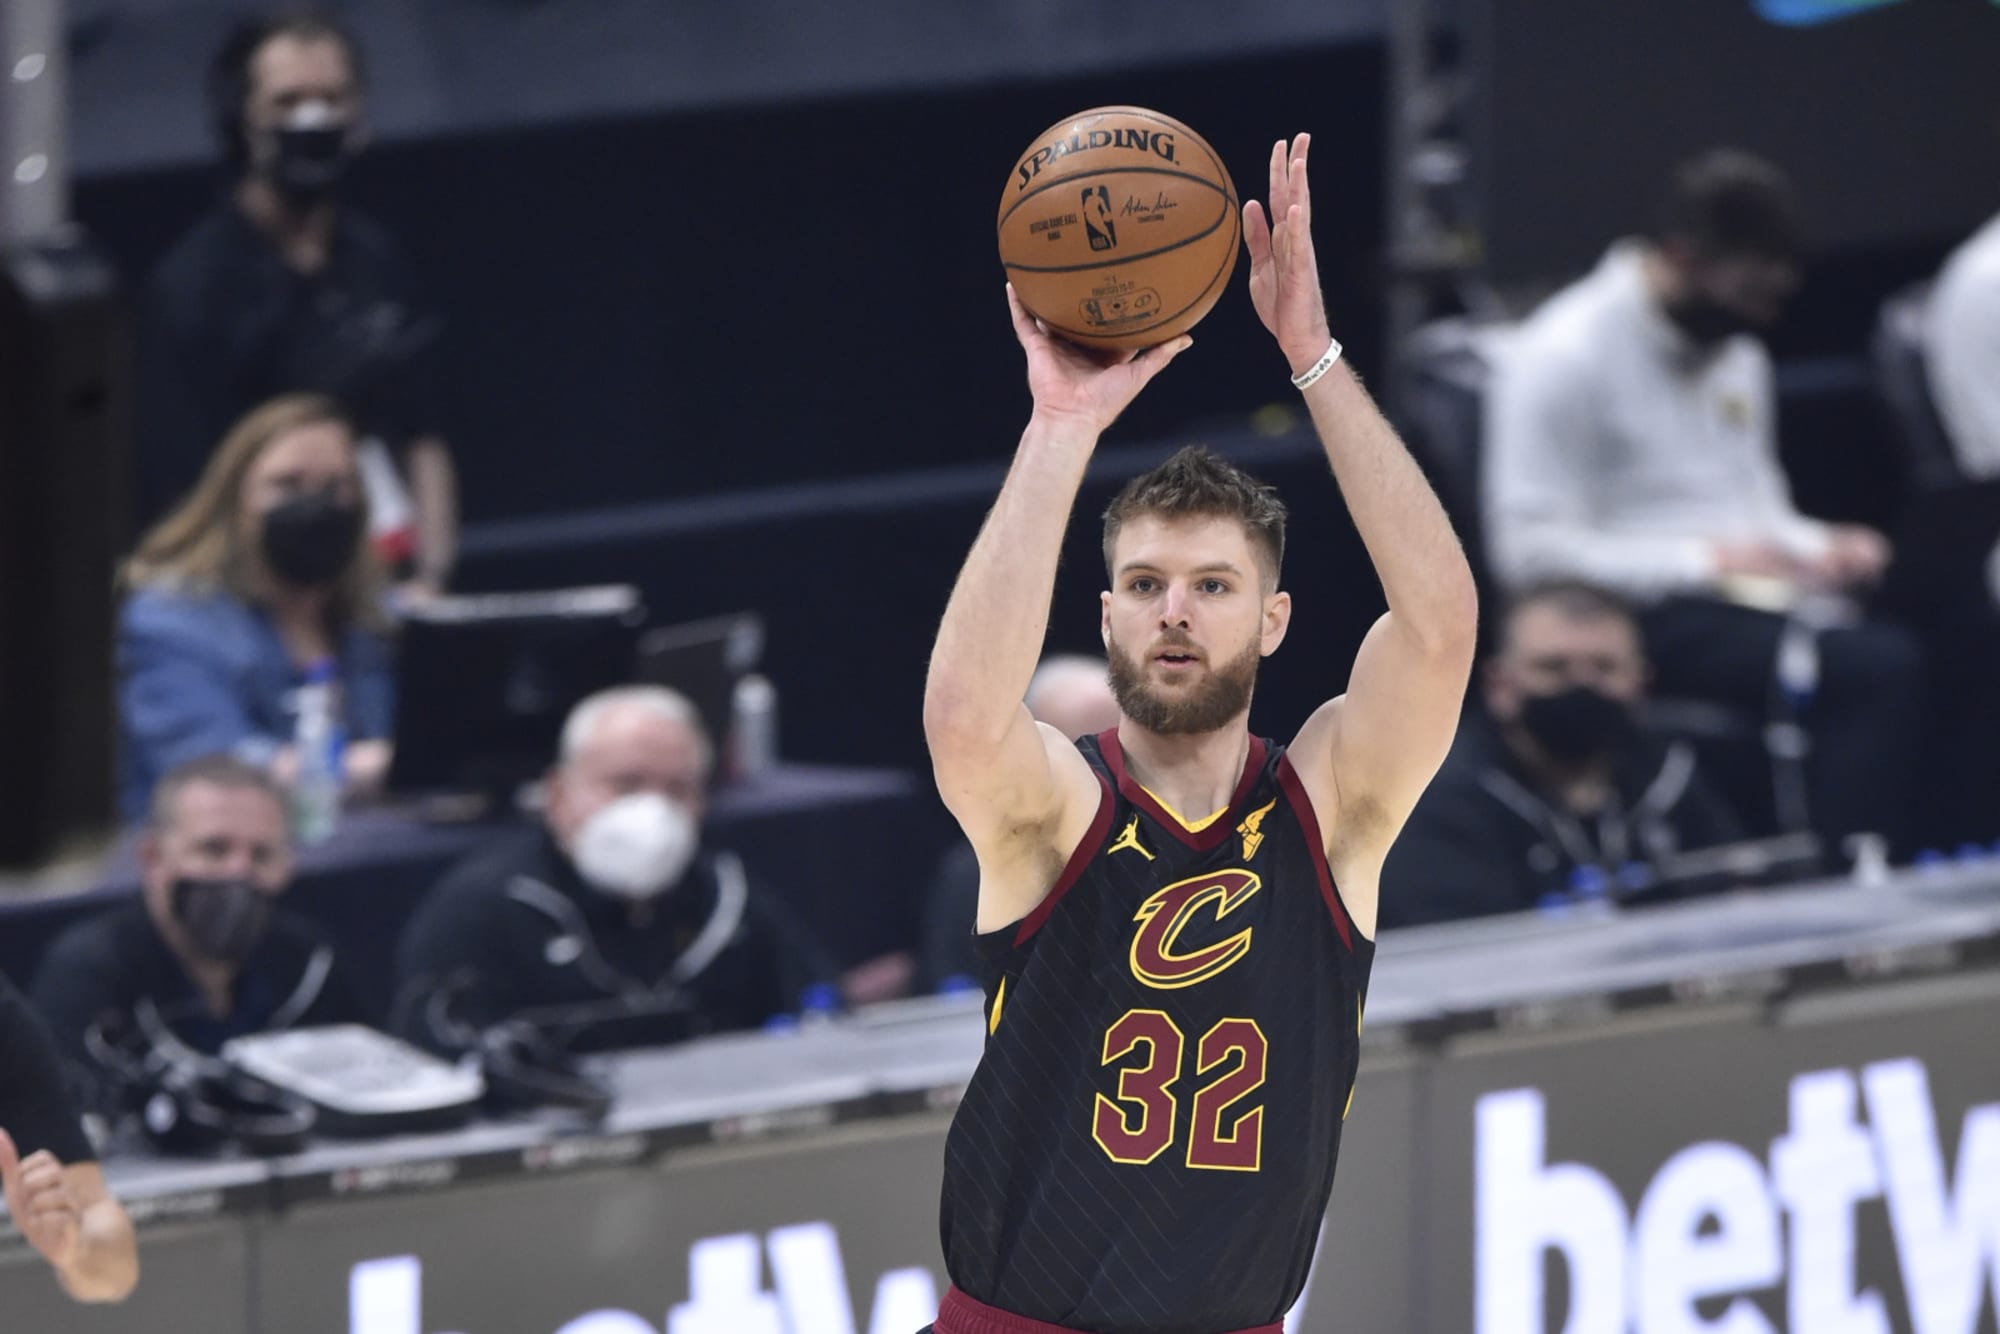 Cleveland Cavaliers Team should trust having Dean Wade in rotation